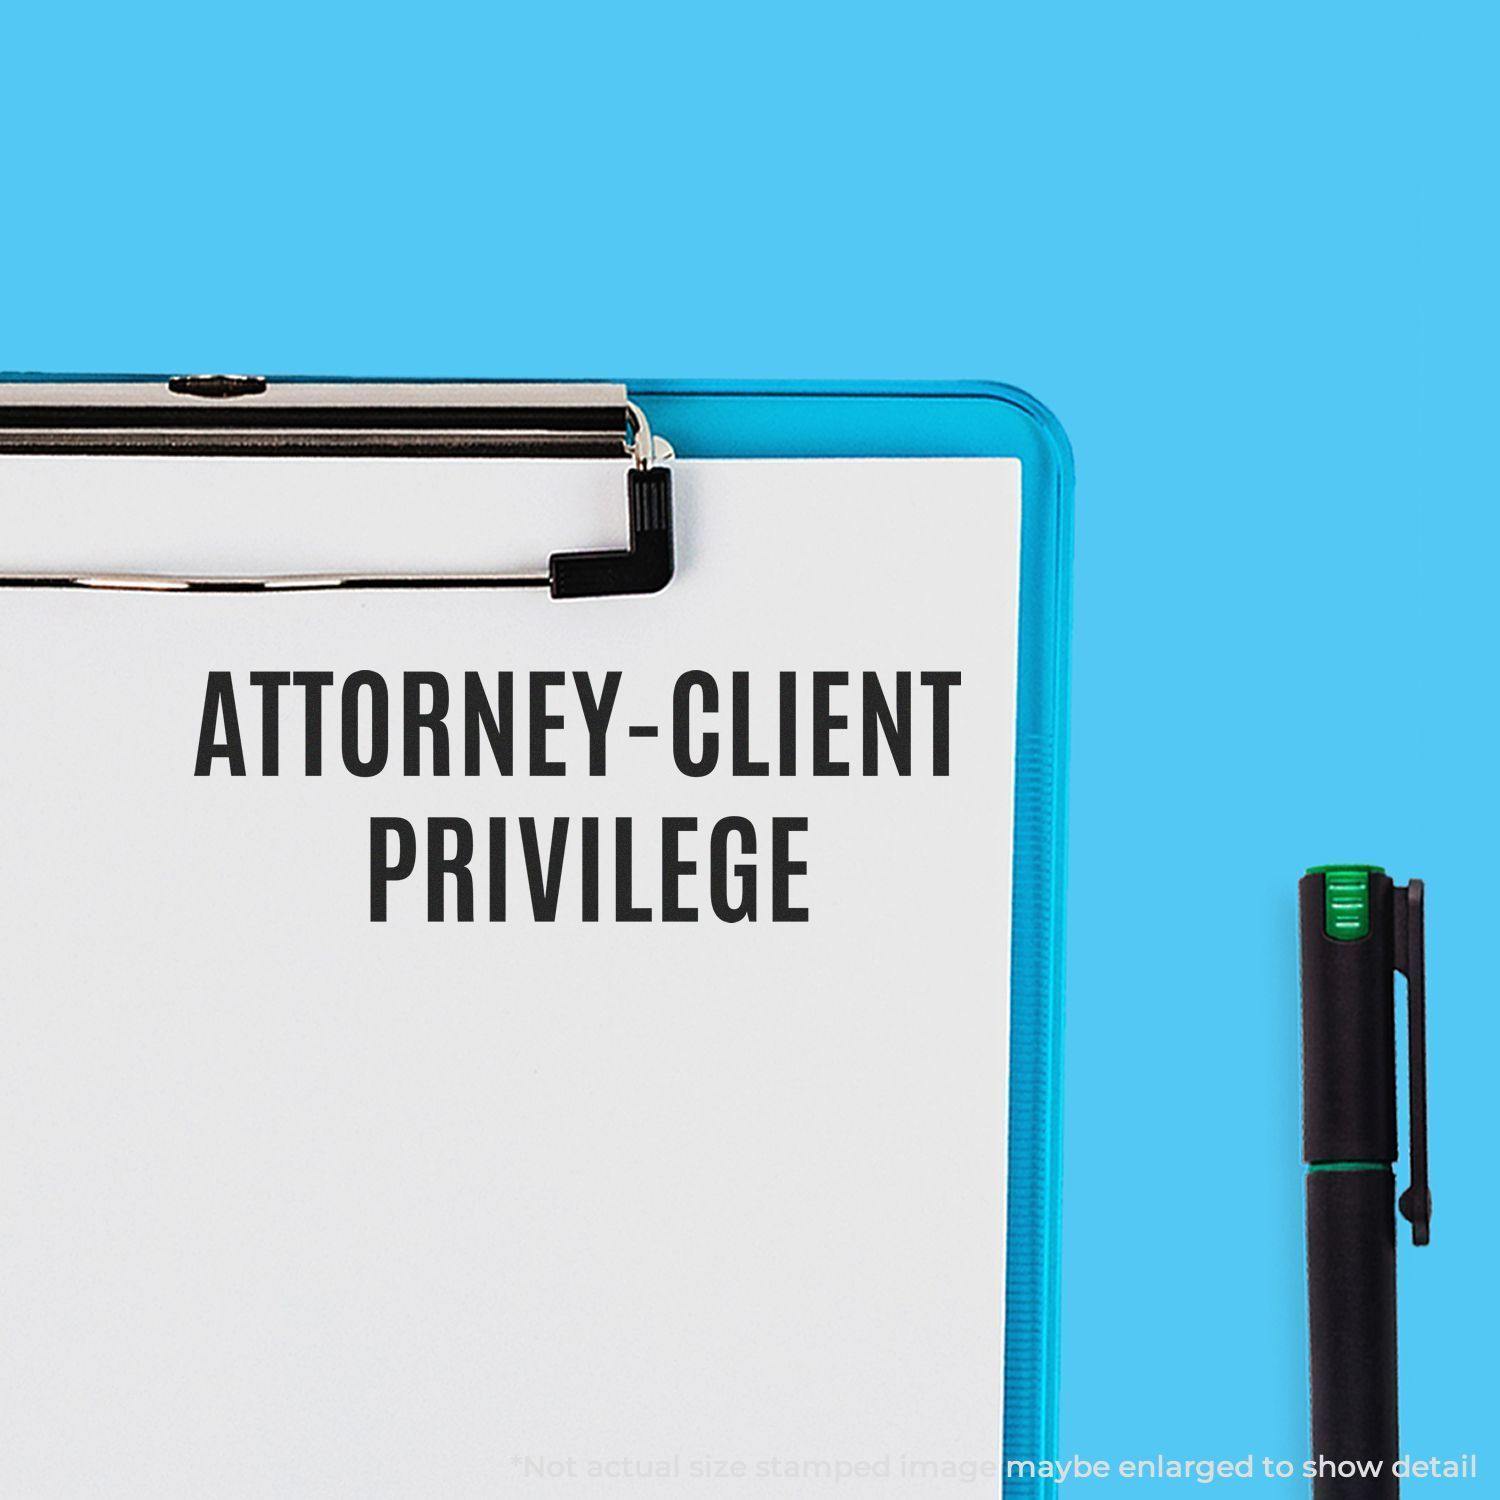 A self-inking stamp with a stamped image showing how the text "ATTORNEY-CLIENT PRIVILEGE" in a large font is displayed by it after stamping.